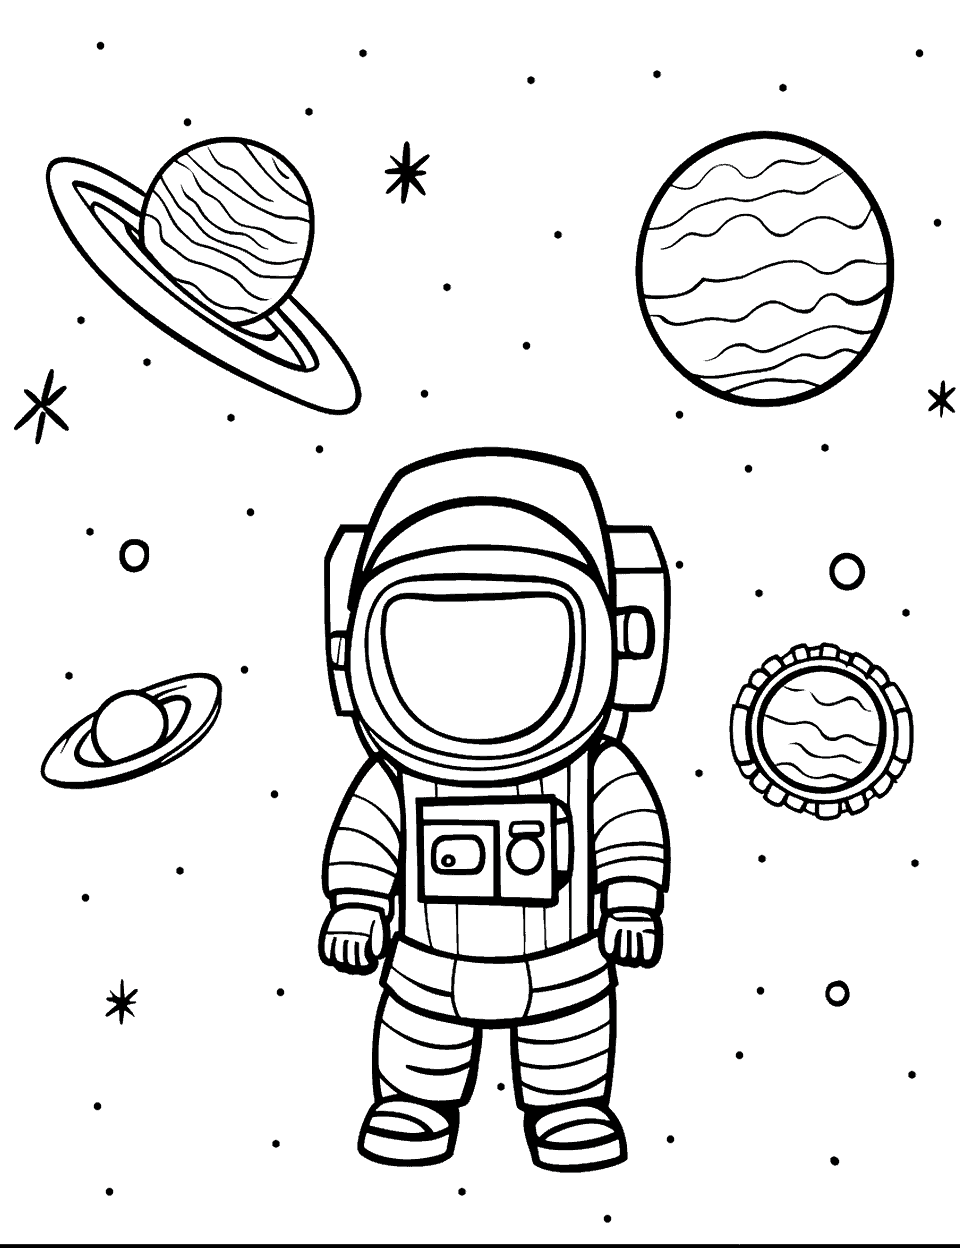 Astronaut and Space Solar System Coloring Page - An astronaut floating in space.